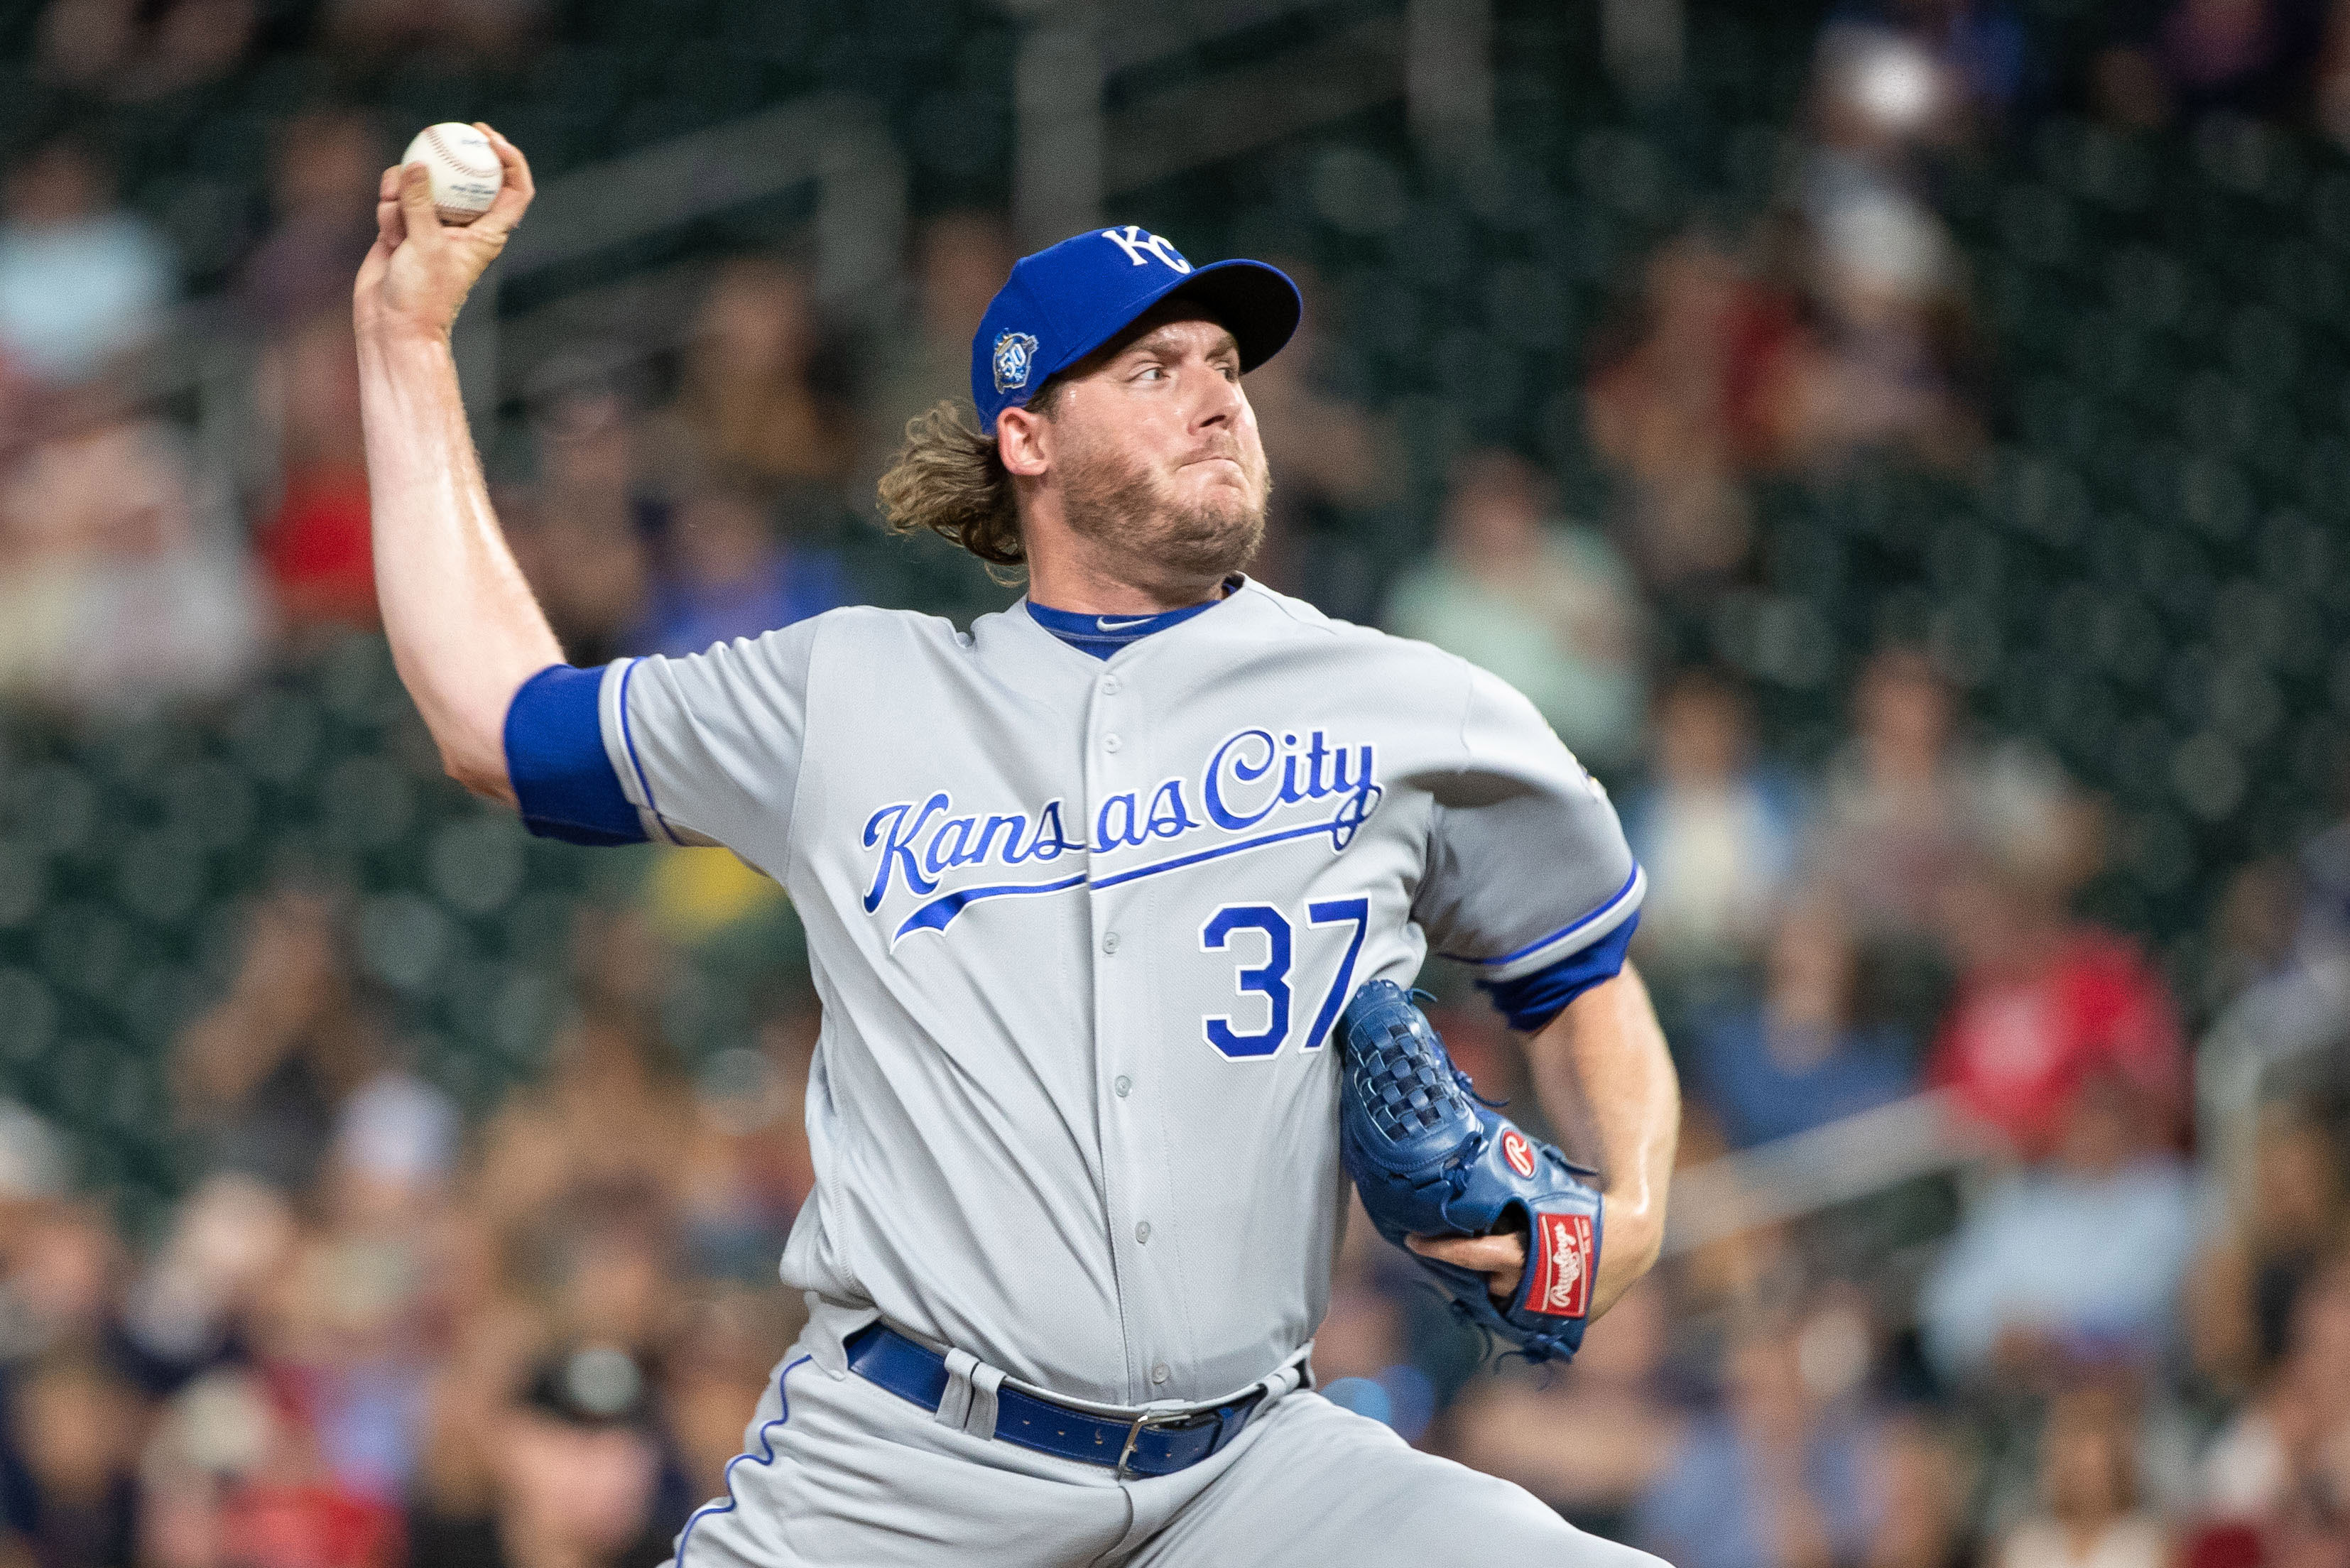 Jul 9, 2018; Minneapolis, MN, USA; Kansas City Royals relief pitcher Brandon Maurer (37) delivers a pitch during the eighth inning against the Minnesota Twins at Target Field. Mandatory Credit: Jordan Johnson-USA TODAY Sports